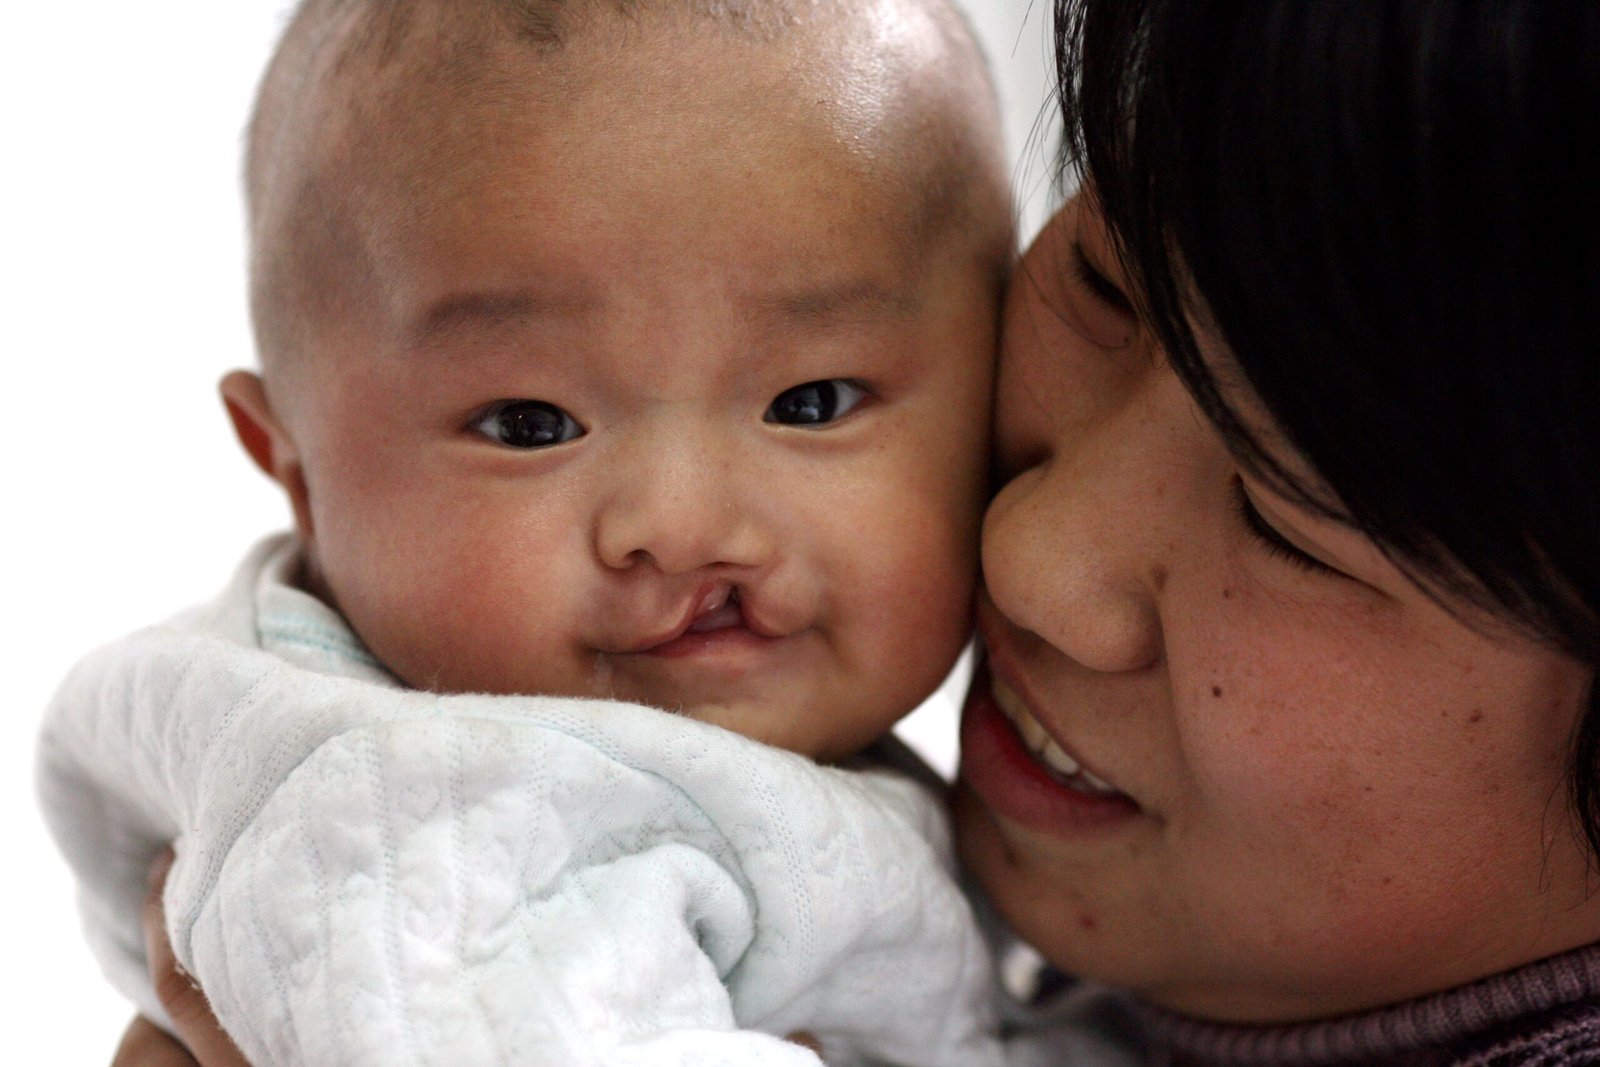 72,000 kids and adult have cleft lip and palate